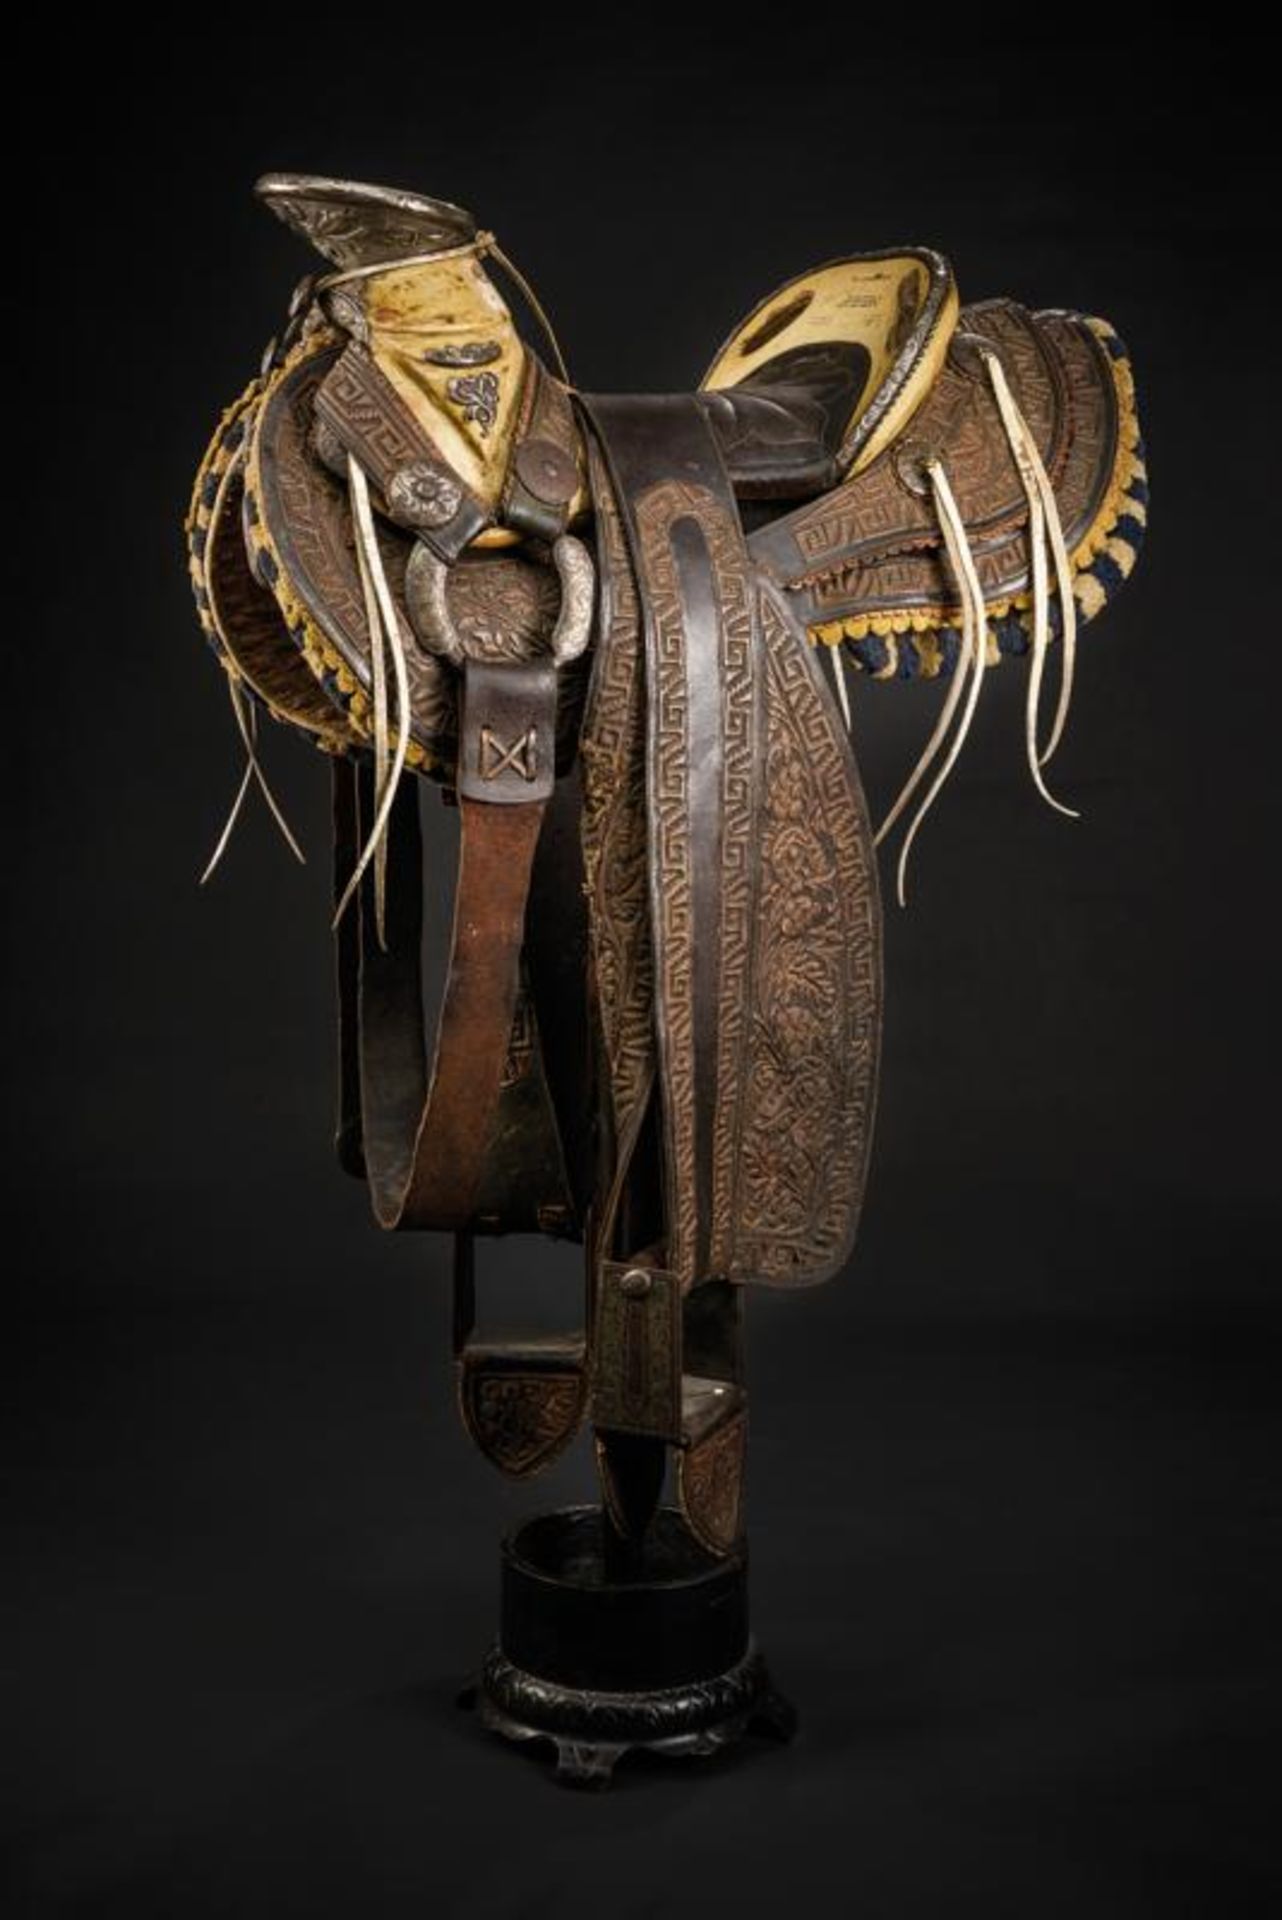 A beautiful Charro saddle from the property of the Mexican Ambassador in Bruxelles